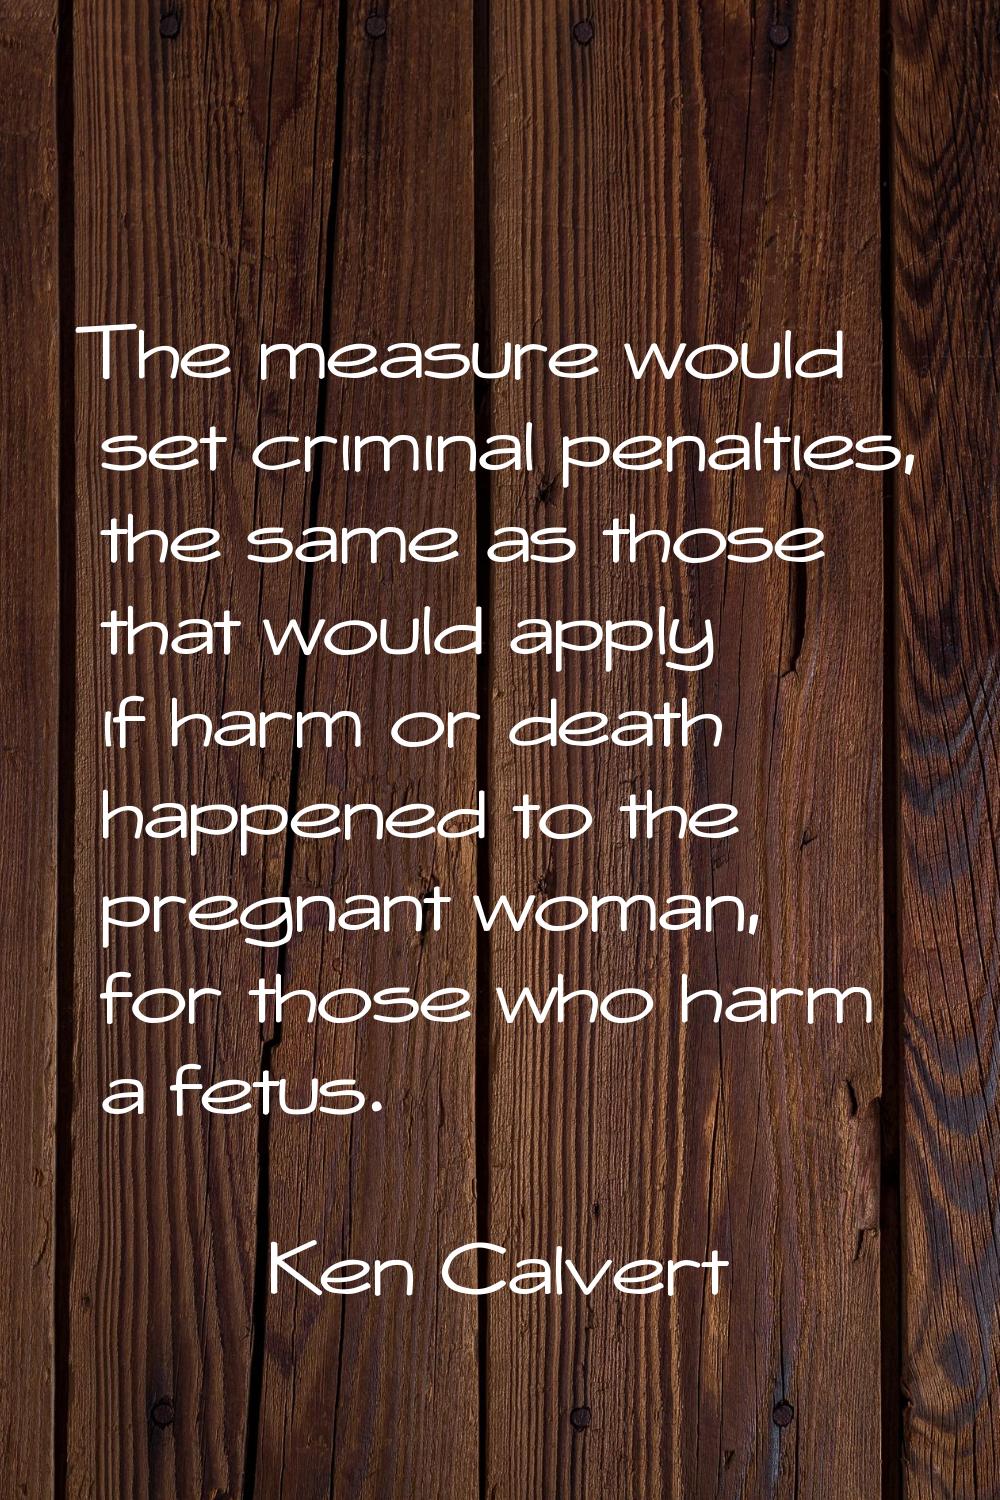 The measure would set criminal penalties, the same as those that would apply if harm or death happe